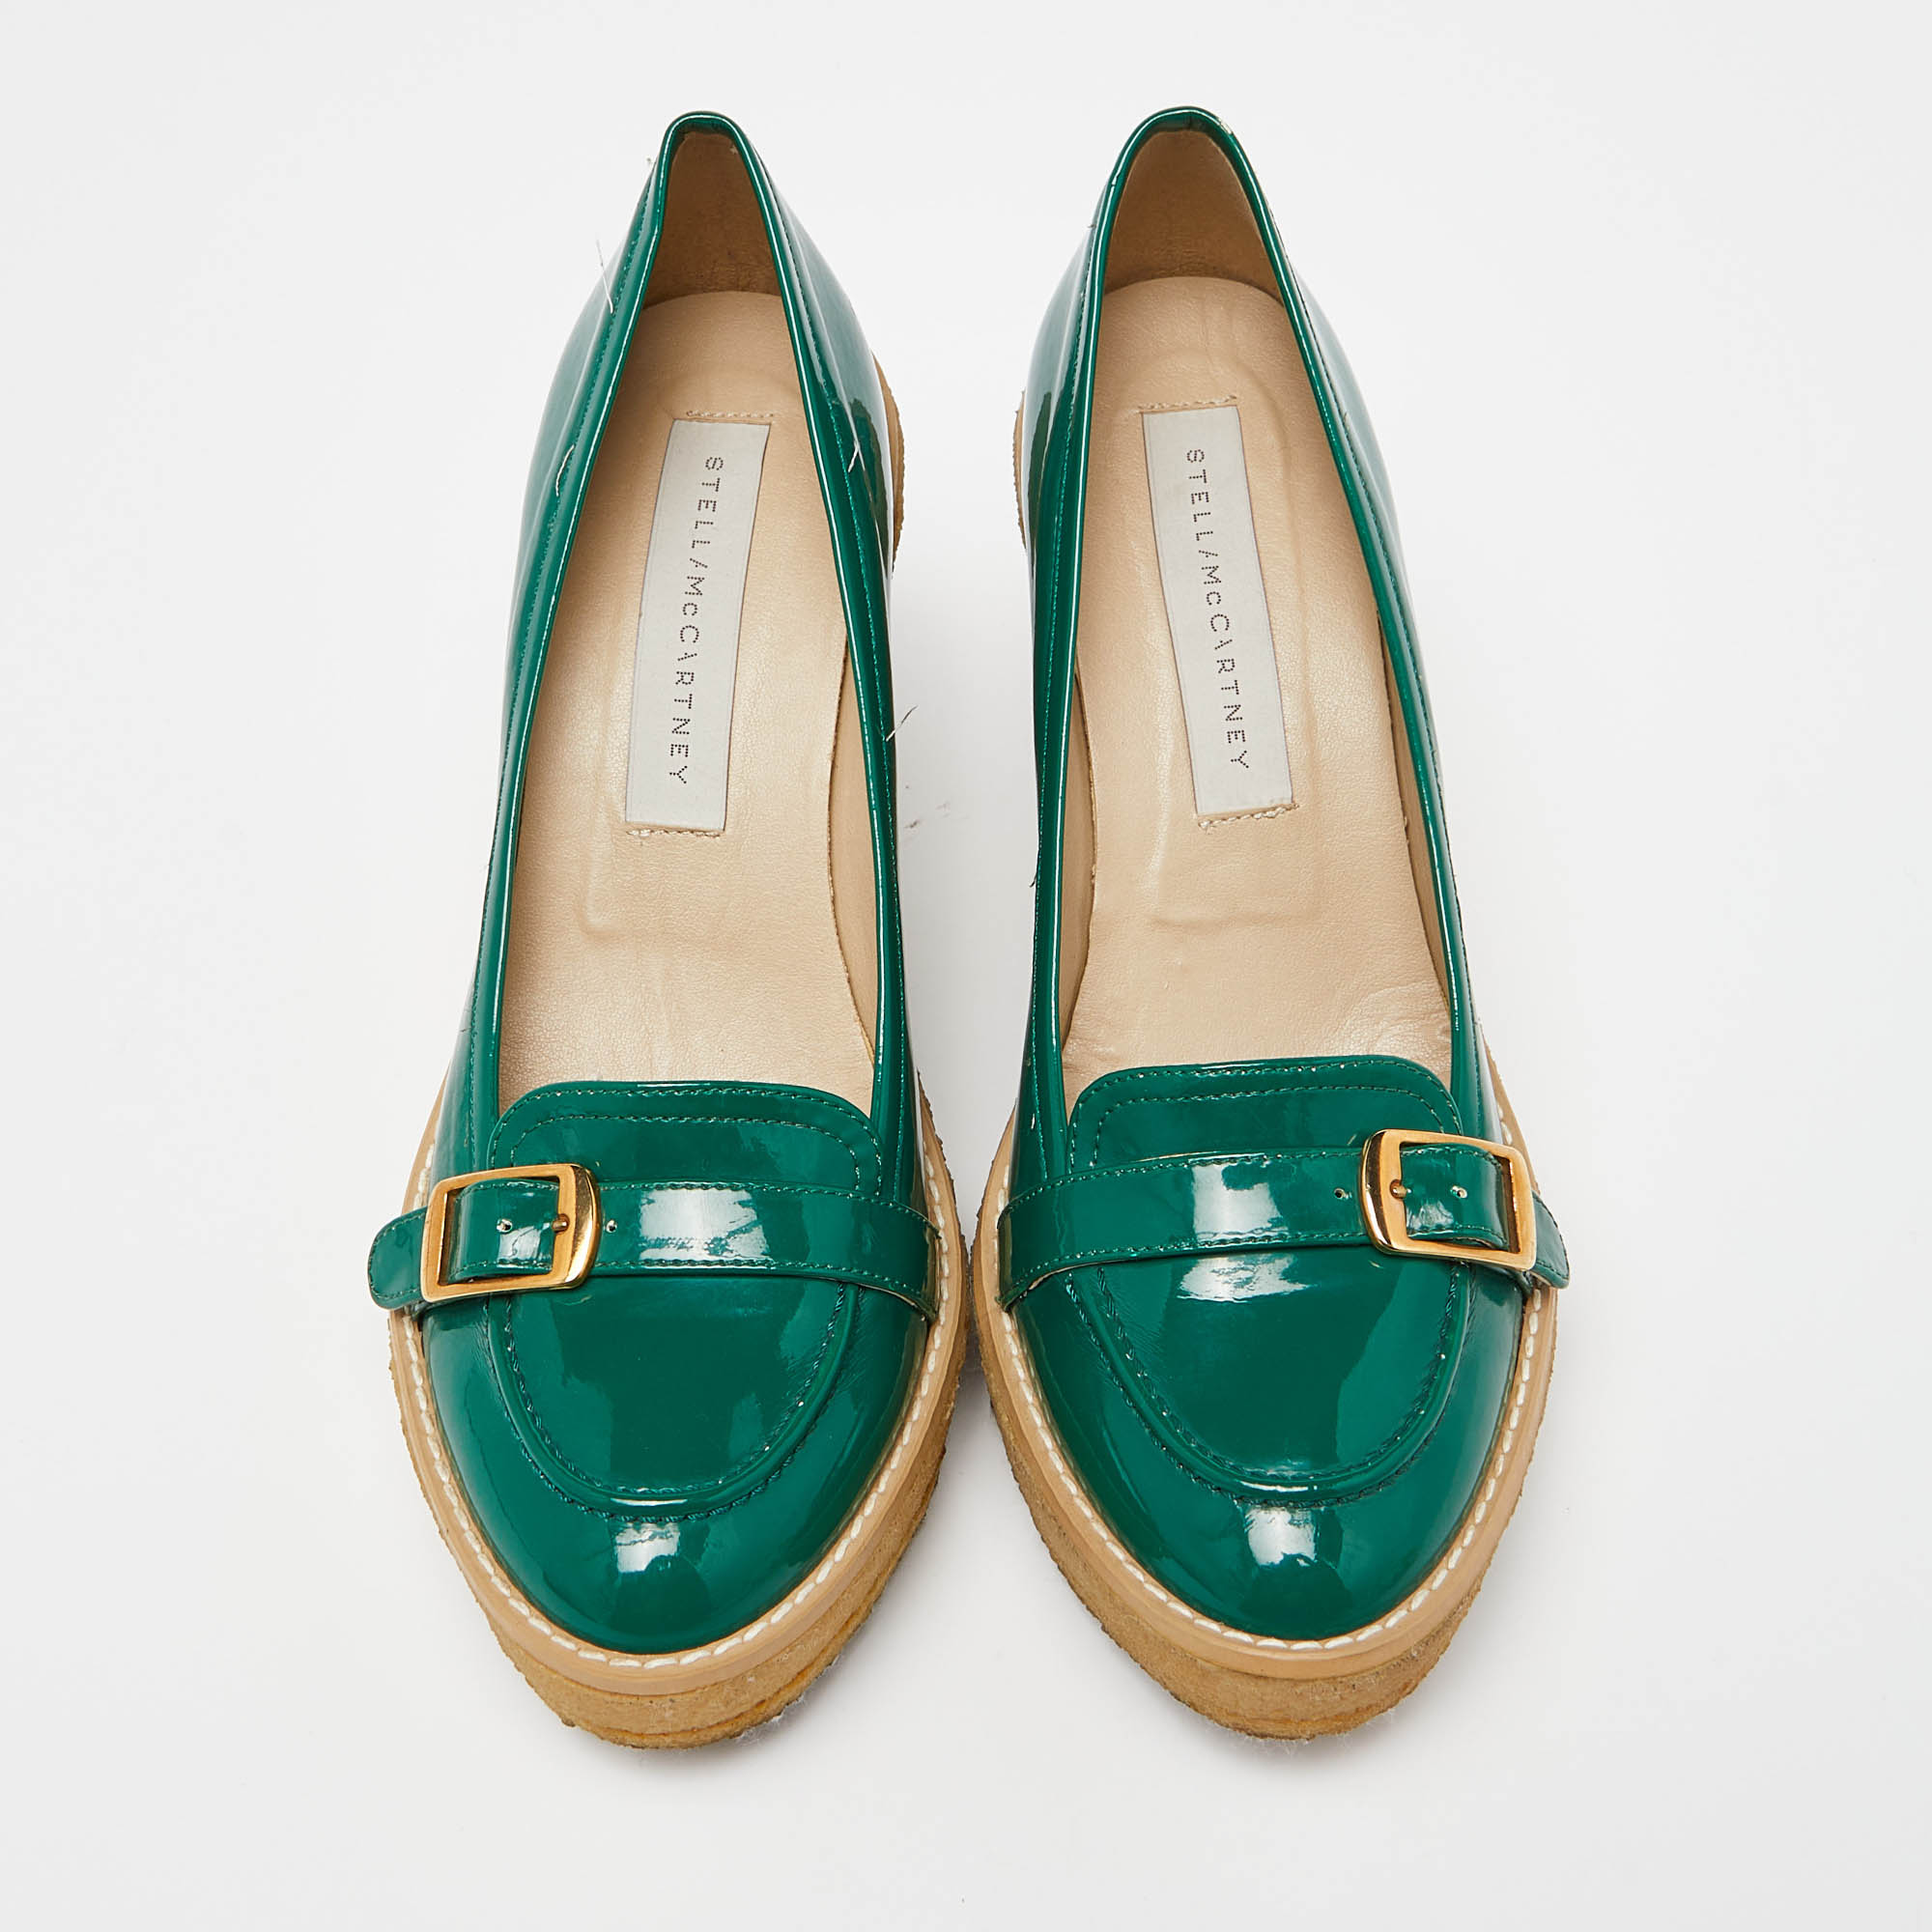 Stella McCartney Green Faux Patent Leather Wedge Loafer Pumps Size 38